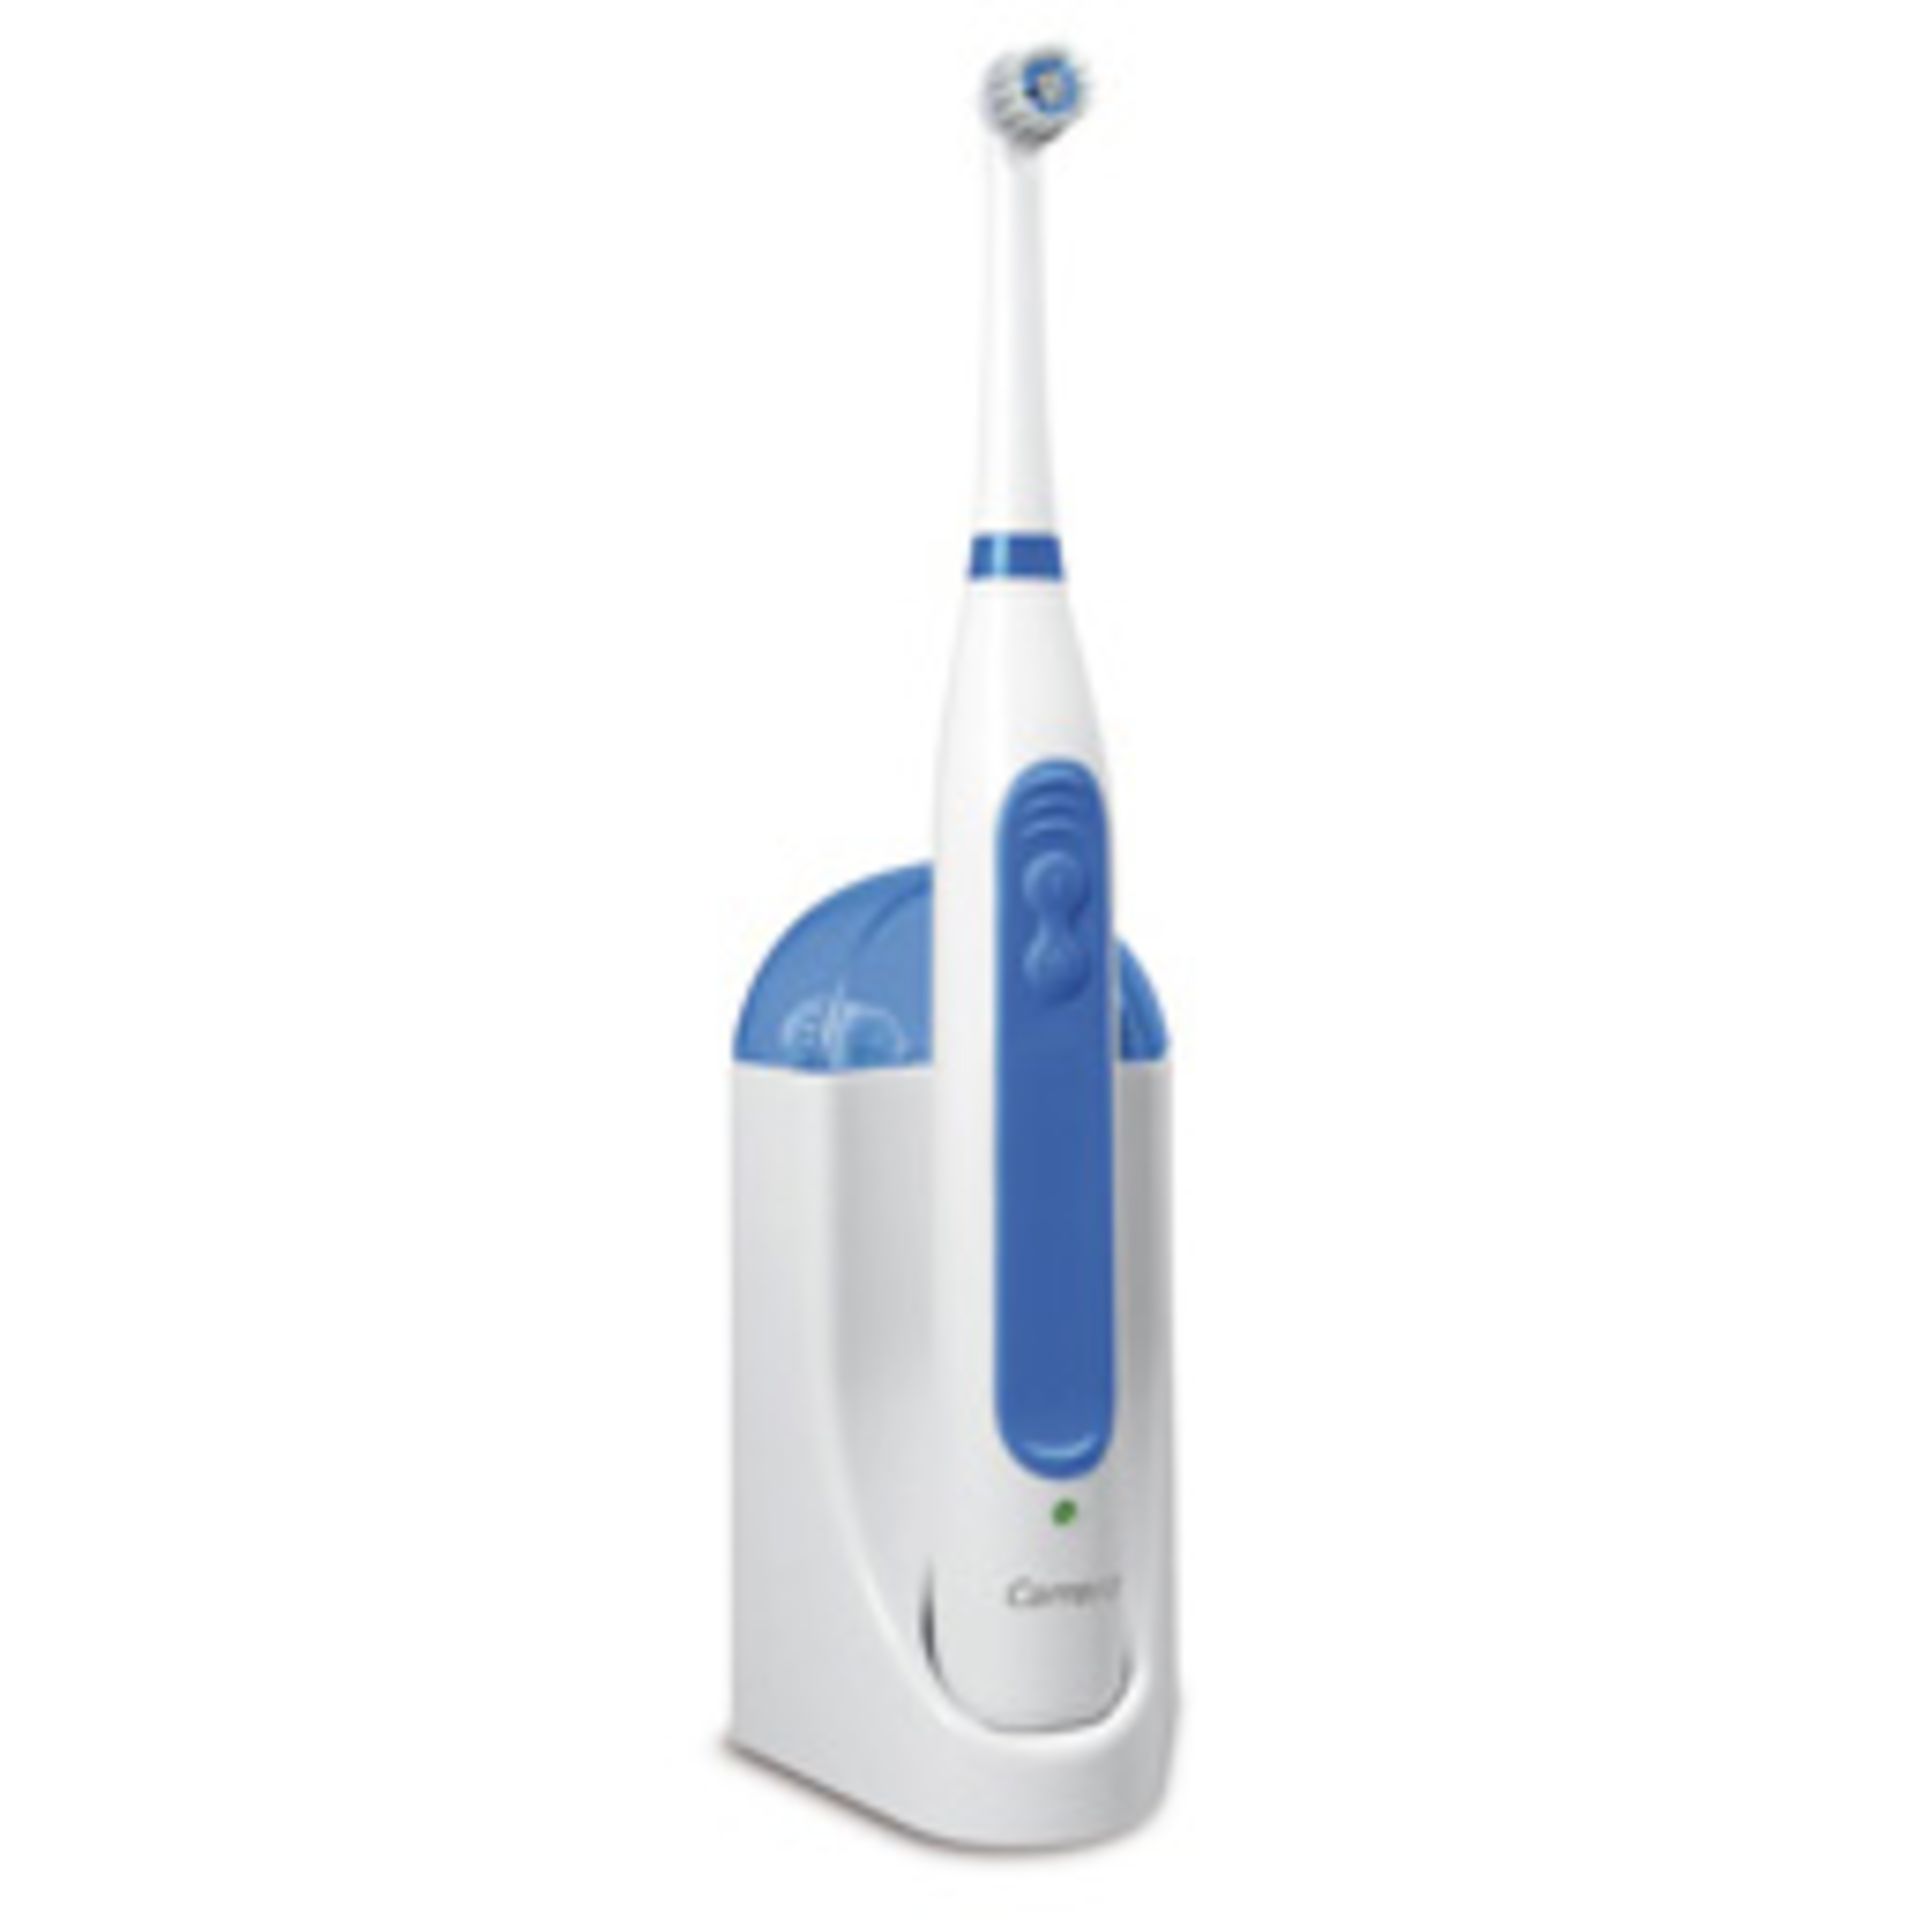 Carrera Electric Toothbrush With Travel Case - Image 2 of 2